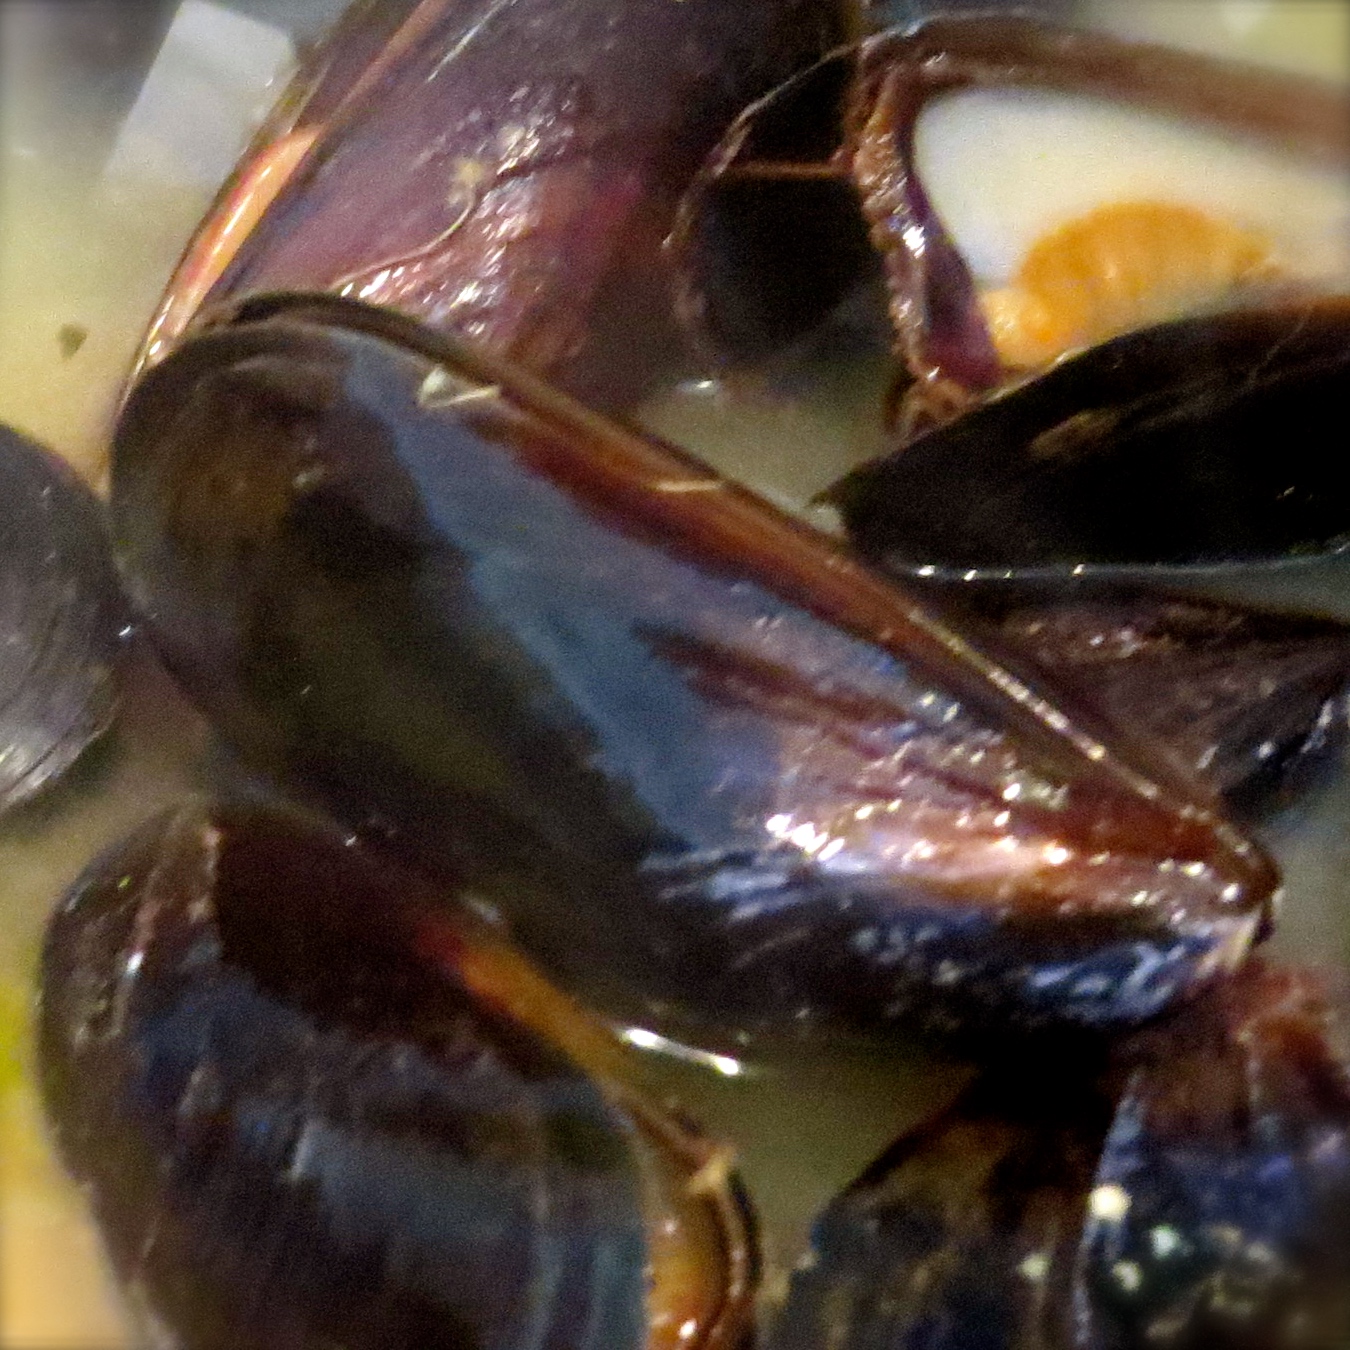 The mussels are put into the fish mixture at the last 2-4 minutes. Discard any closed mussels before serving.